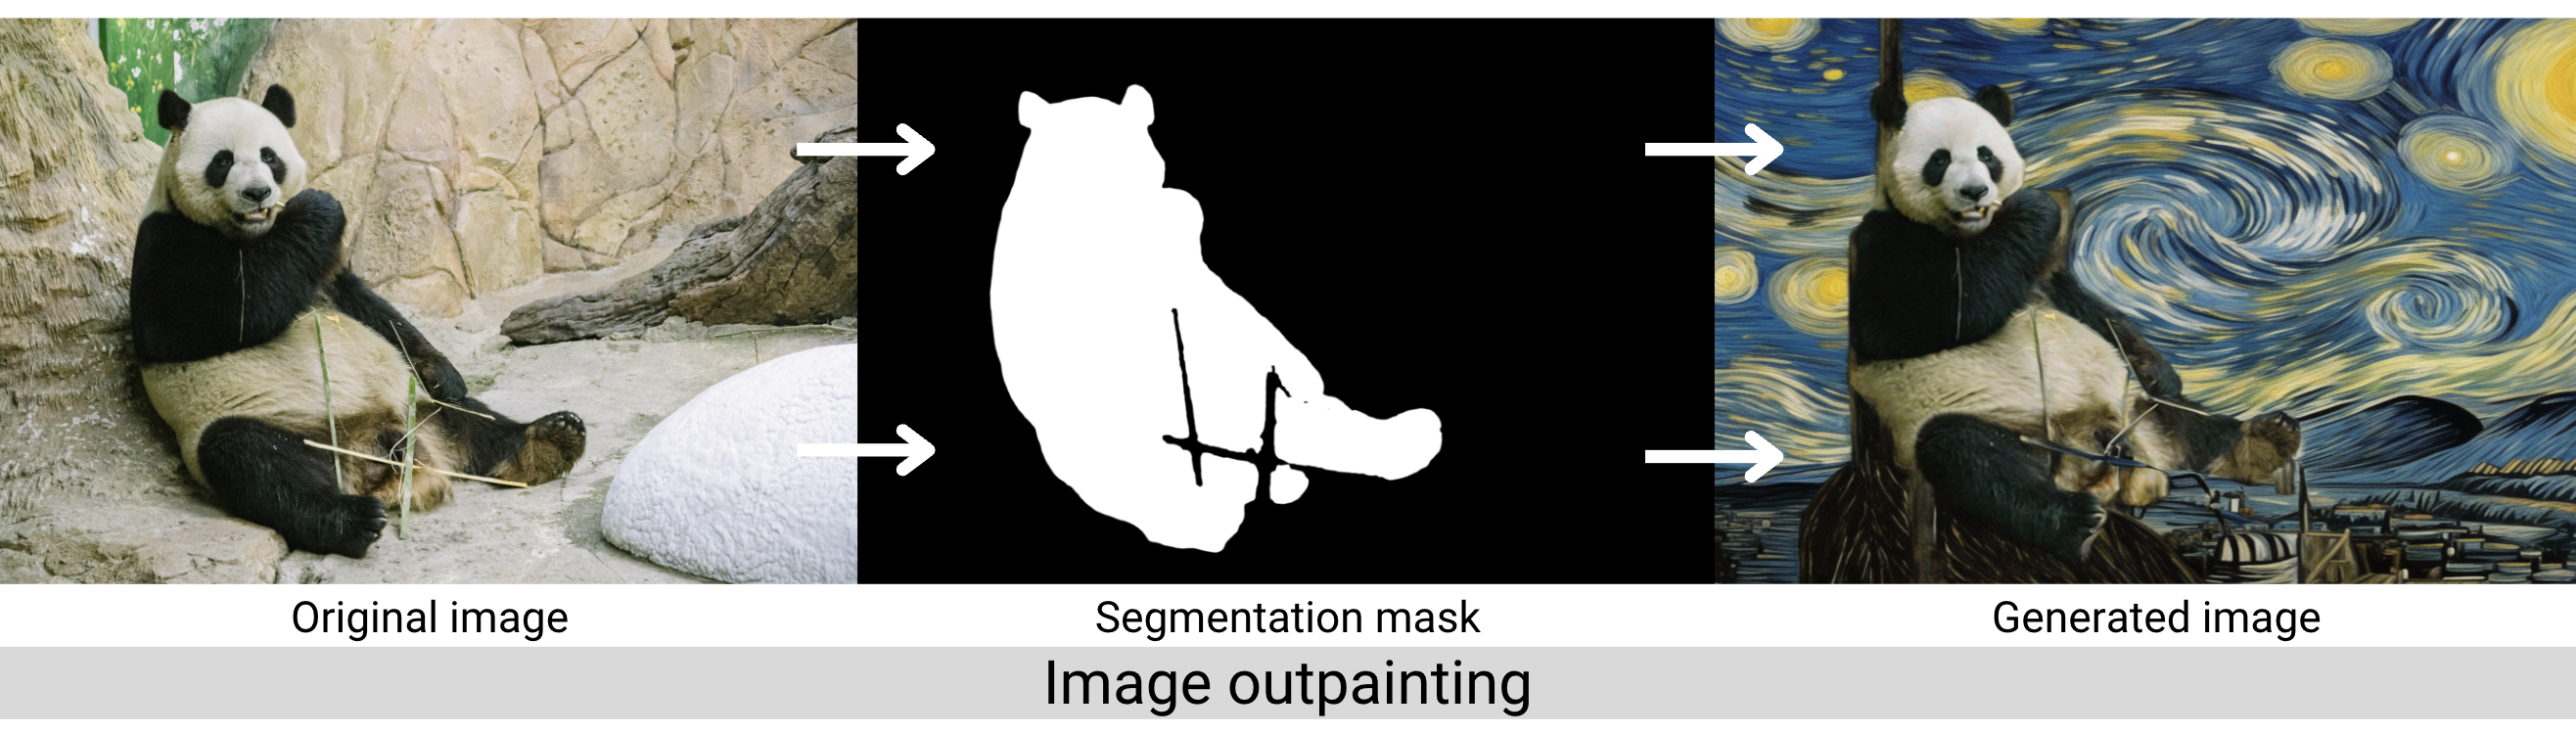 Graphic of image outpainting showing an original input image of a panda, a segmentation mask, and the inpainted image resulting from the SDXL 1.0 diffusion model.